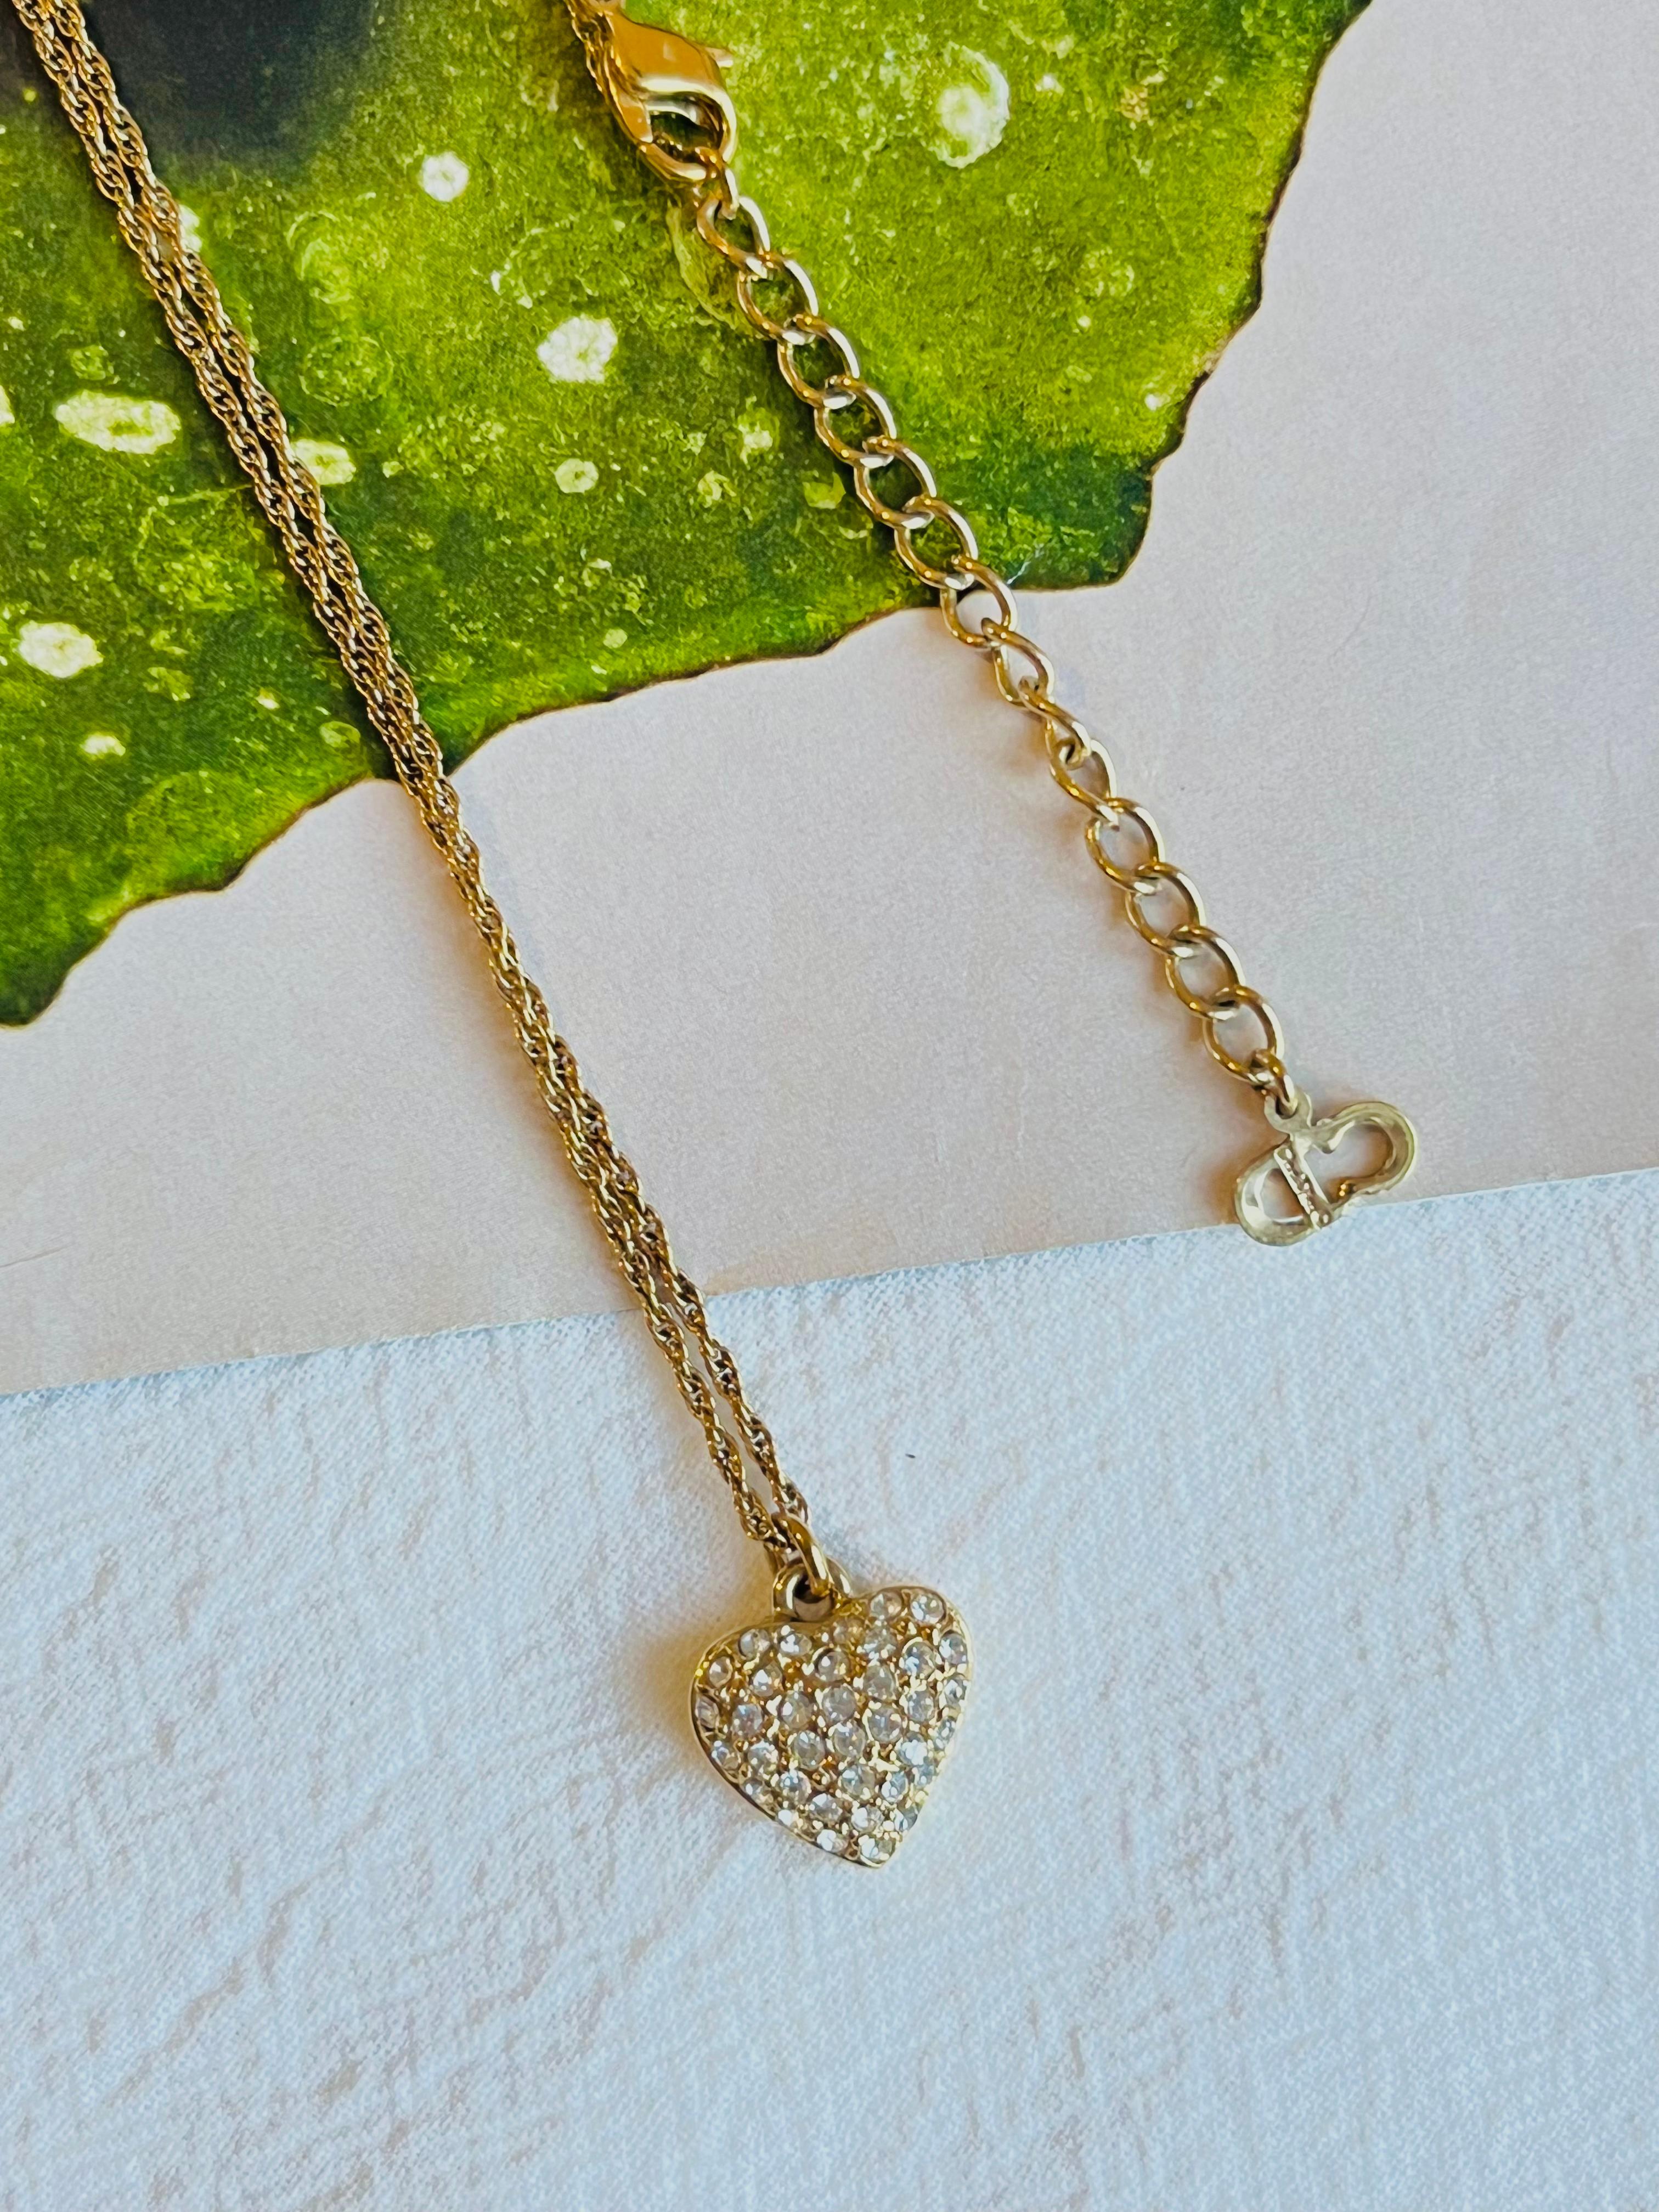 Very good condition. Not any scratches or colour loss, only one connection near the hook is not perfect, barely noticeable.

Marked 'Chr.Dior (C) '. 100% Genuine.

This is a very stylish and rare piece of jewellery.

Length: 38 cm. Extend chain: 6